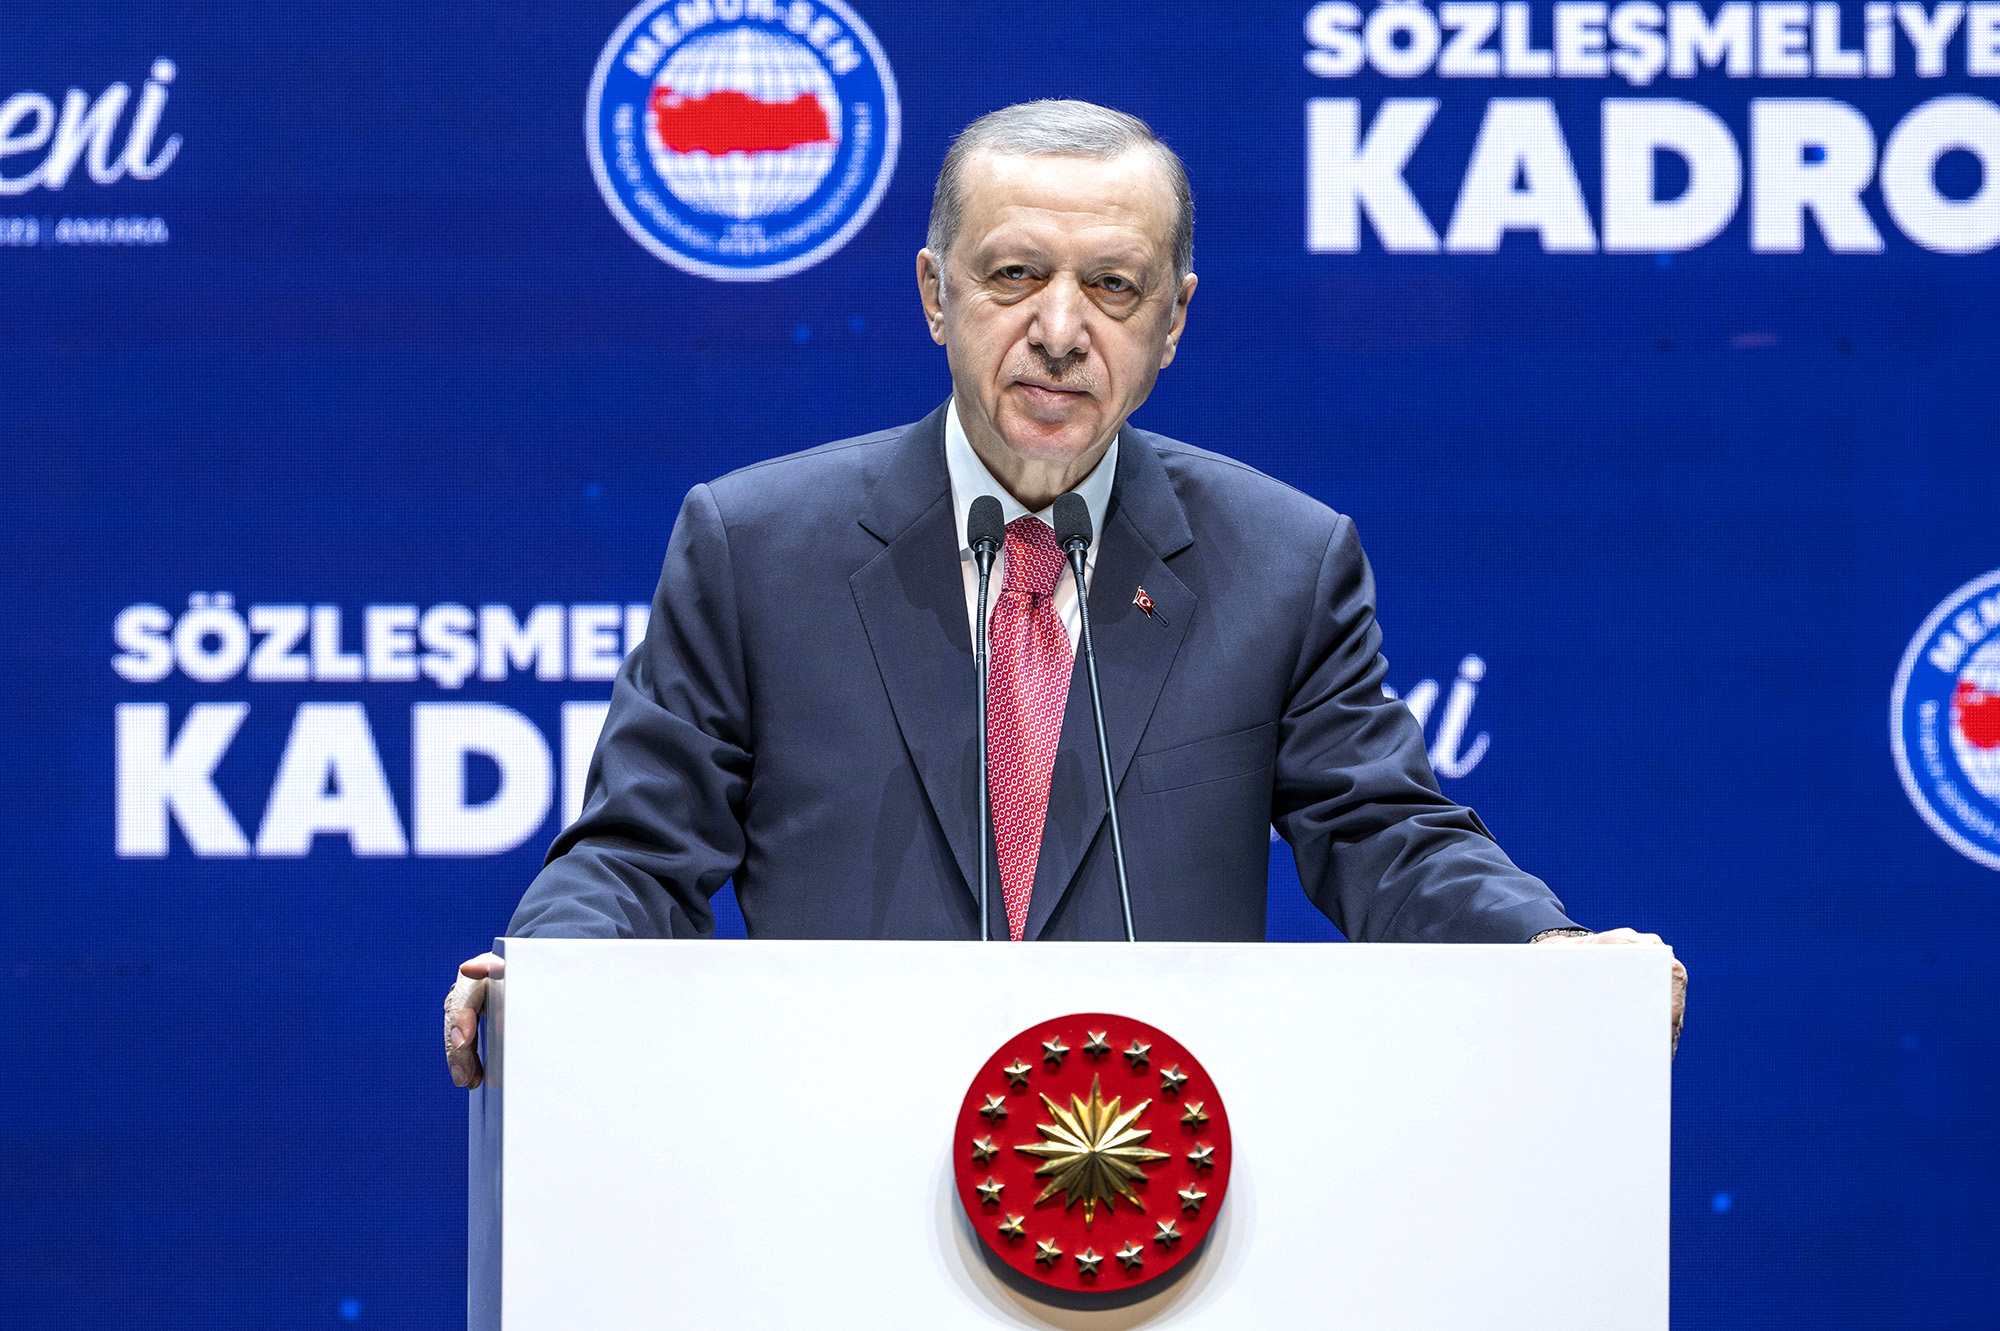 Turkish President Recep Tayyip Erdogan makes a speech as he attends a program at the ATO Convention and Exhibition Center in Ankara, Turkey, on January 3.